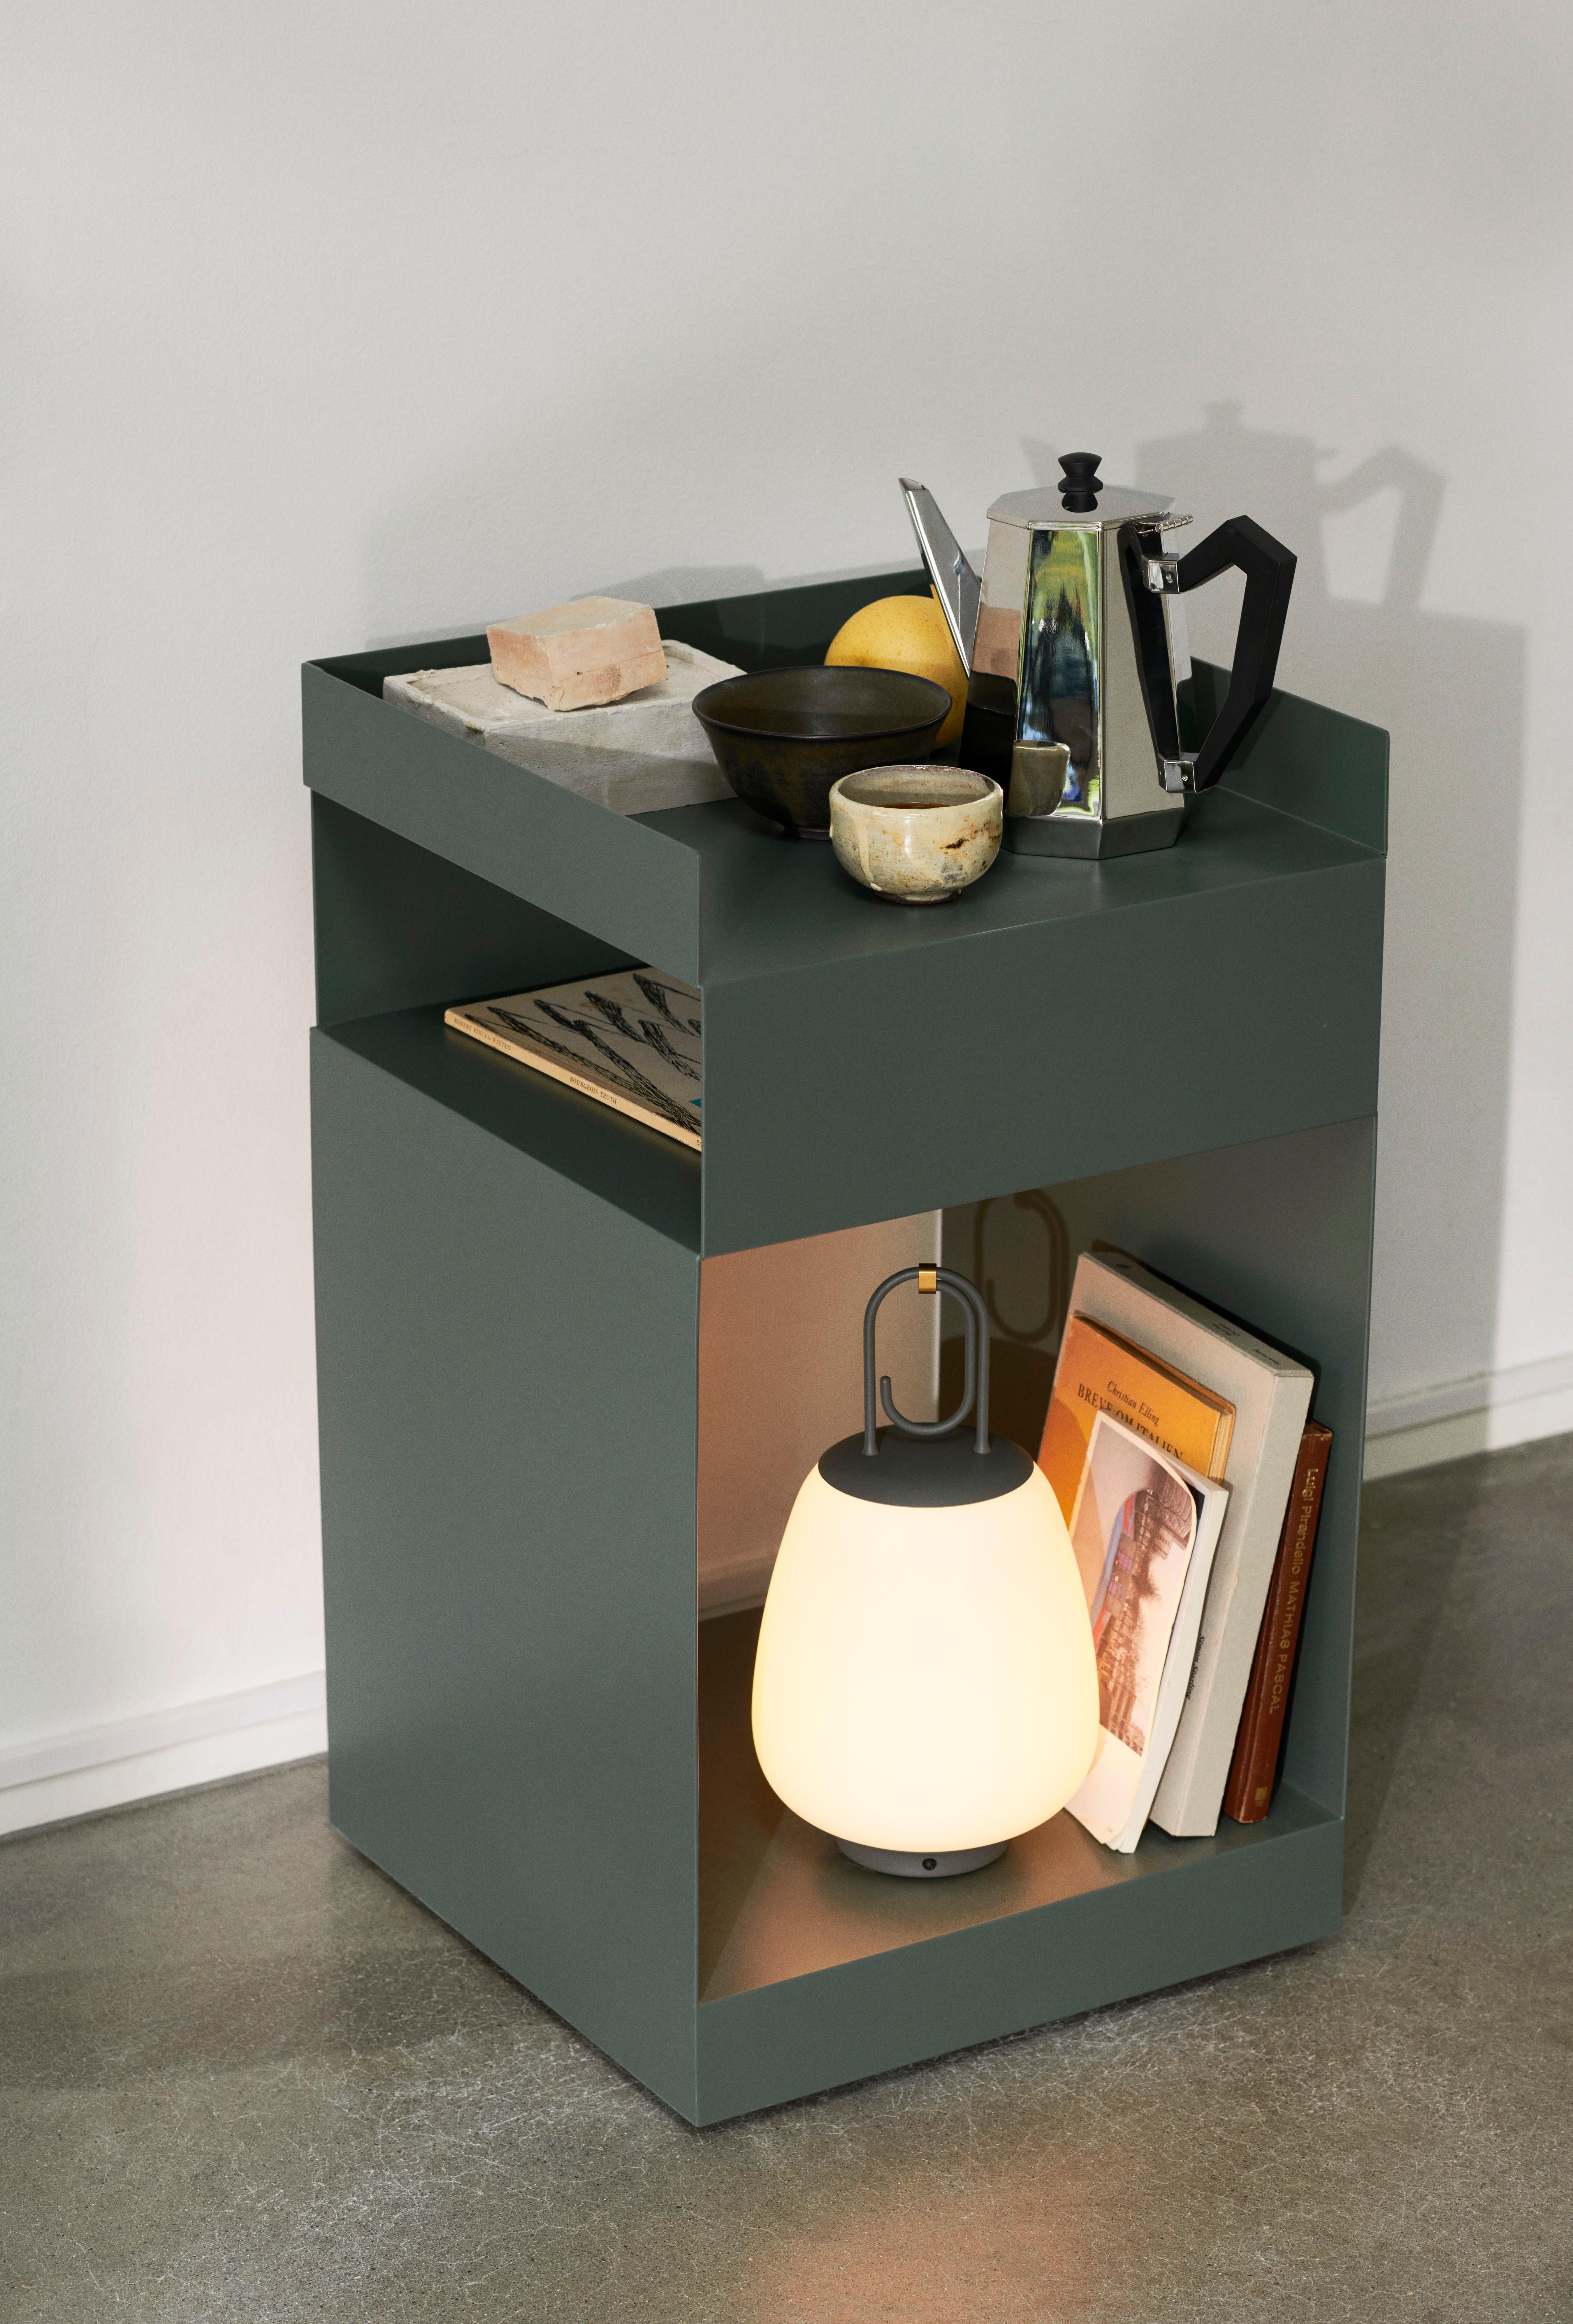 Rotate’s unassuming appearance belies its highly functional design. Created to fulfil a wide variety of purposes – from an office trolley, to a bedside table or bathroom storage unit – this asymmetrical piece can be inserted into any space. To